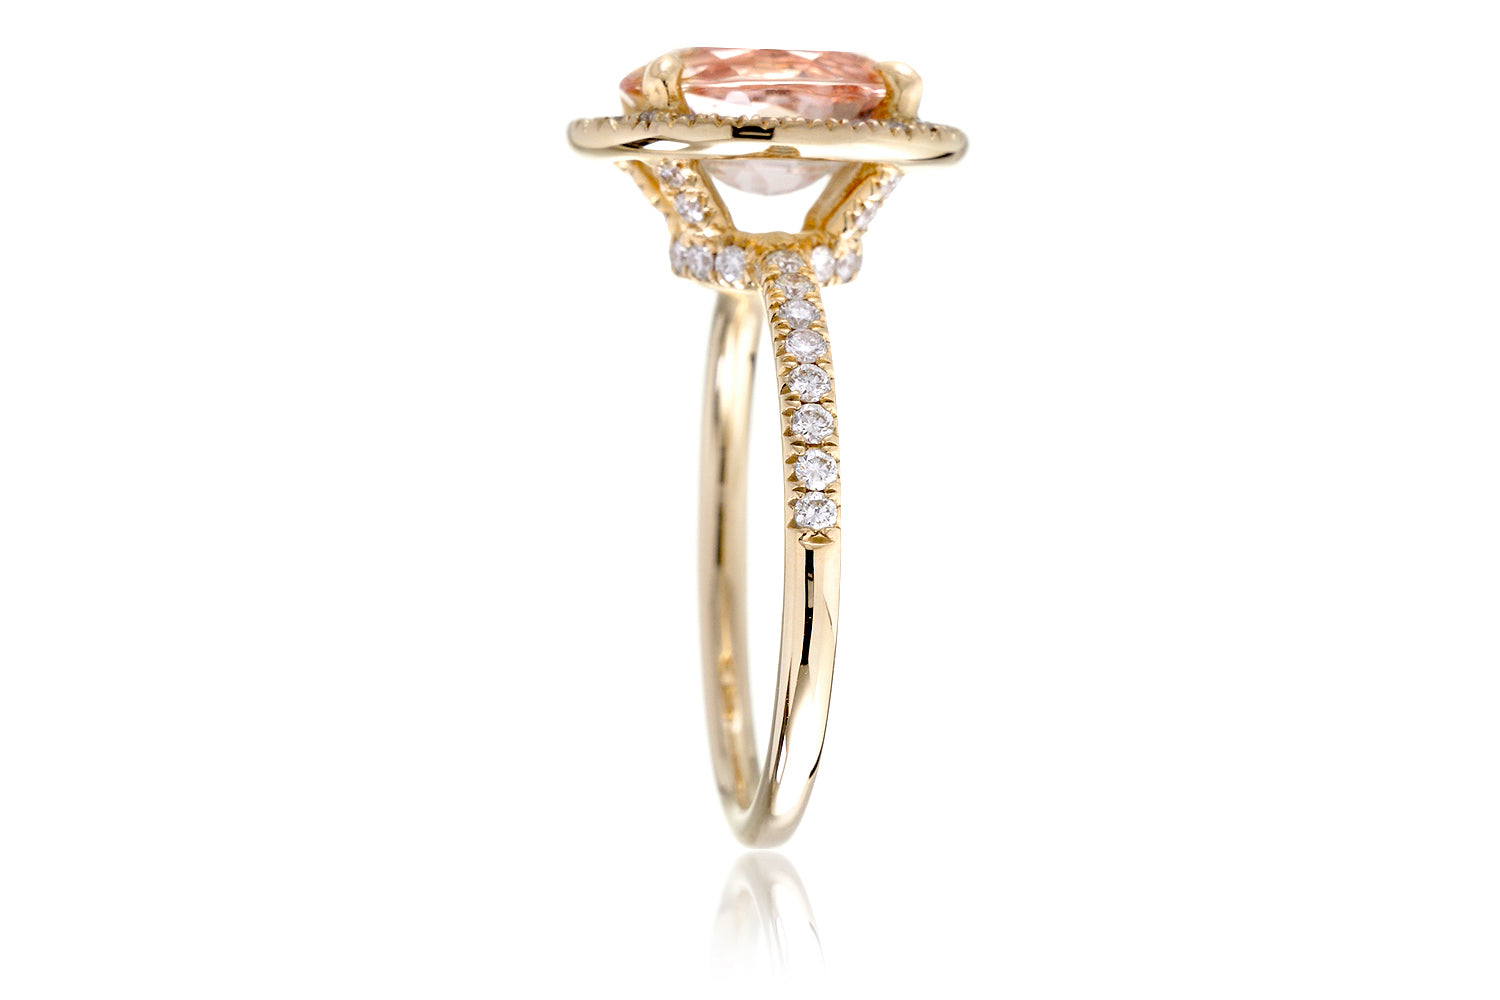 The Drenched Oval Morganite Engagement Ring – samNsue